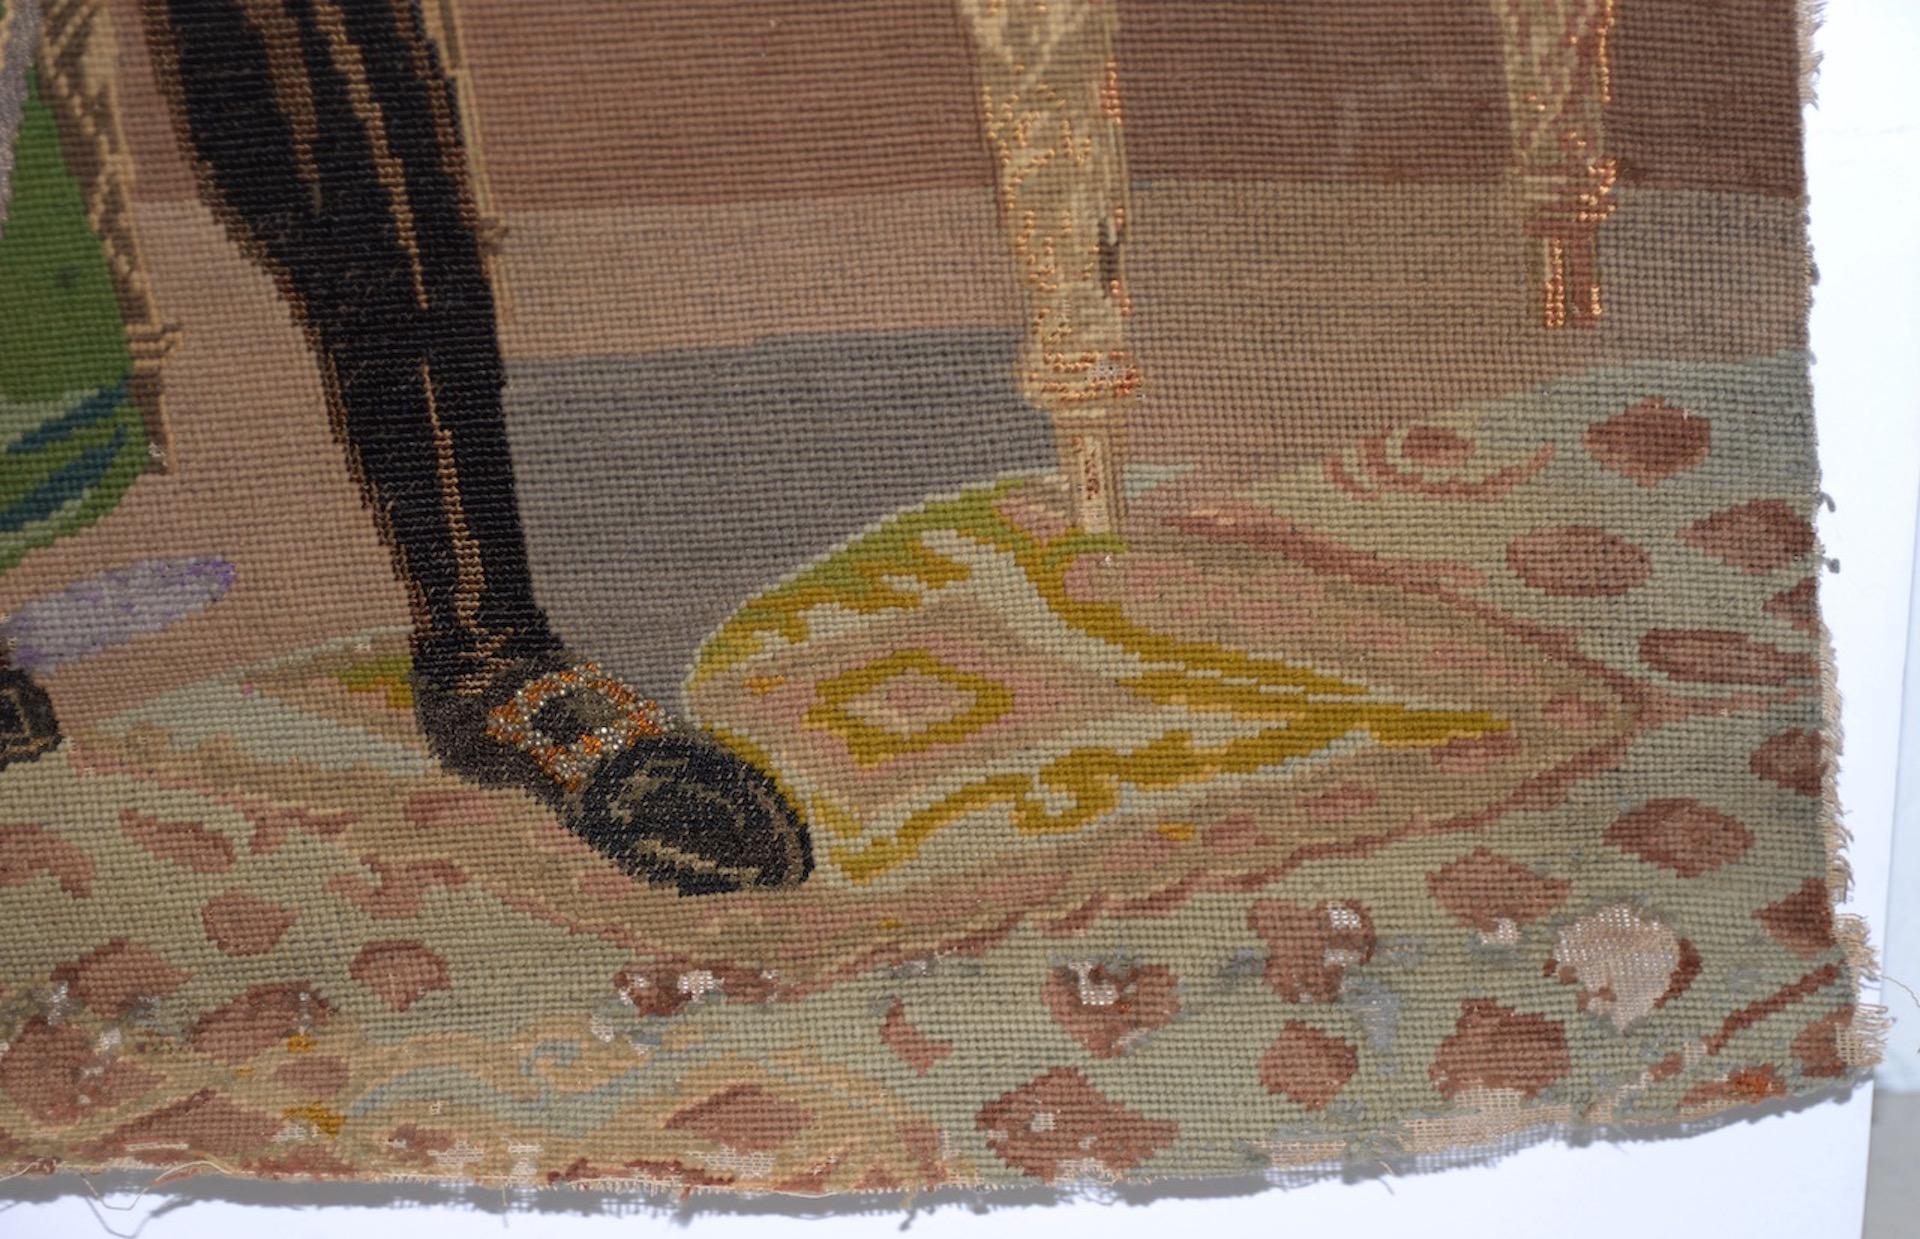 George Washington hand embroidered tapestry, circa 1850s

Finely hand embroidered tapestry of George Washington. Though completely handmade, this was created in an industry setting, as other examples have appeared on the market in smaller sizes